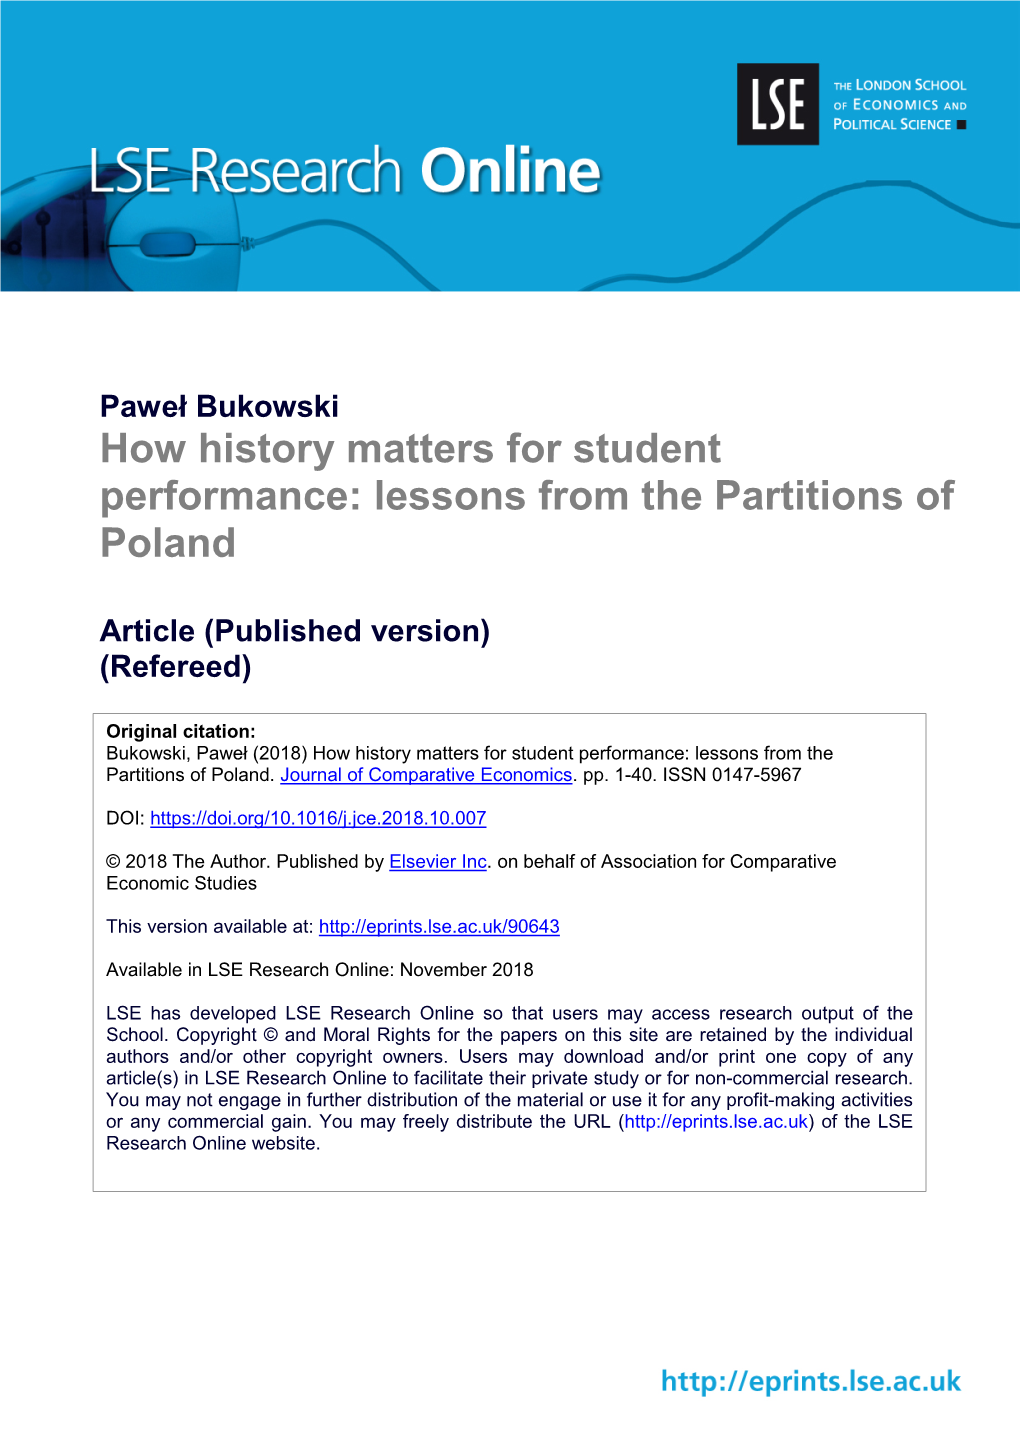 How History Matters for Student Performance: Lessons from the Partitions of Poland